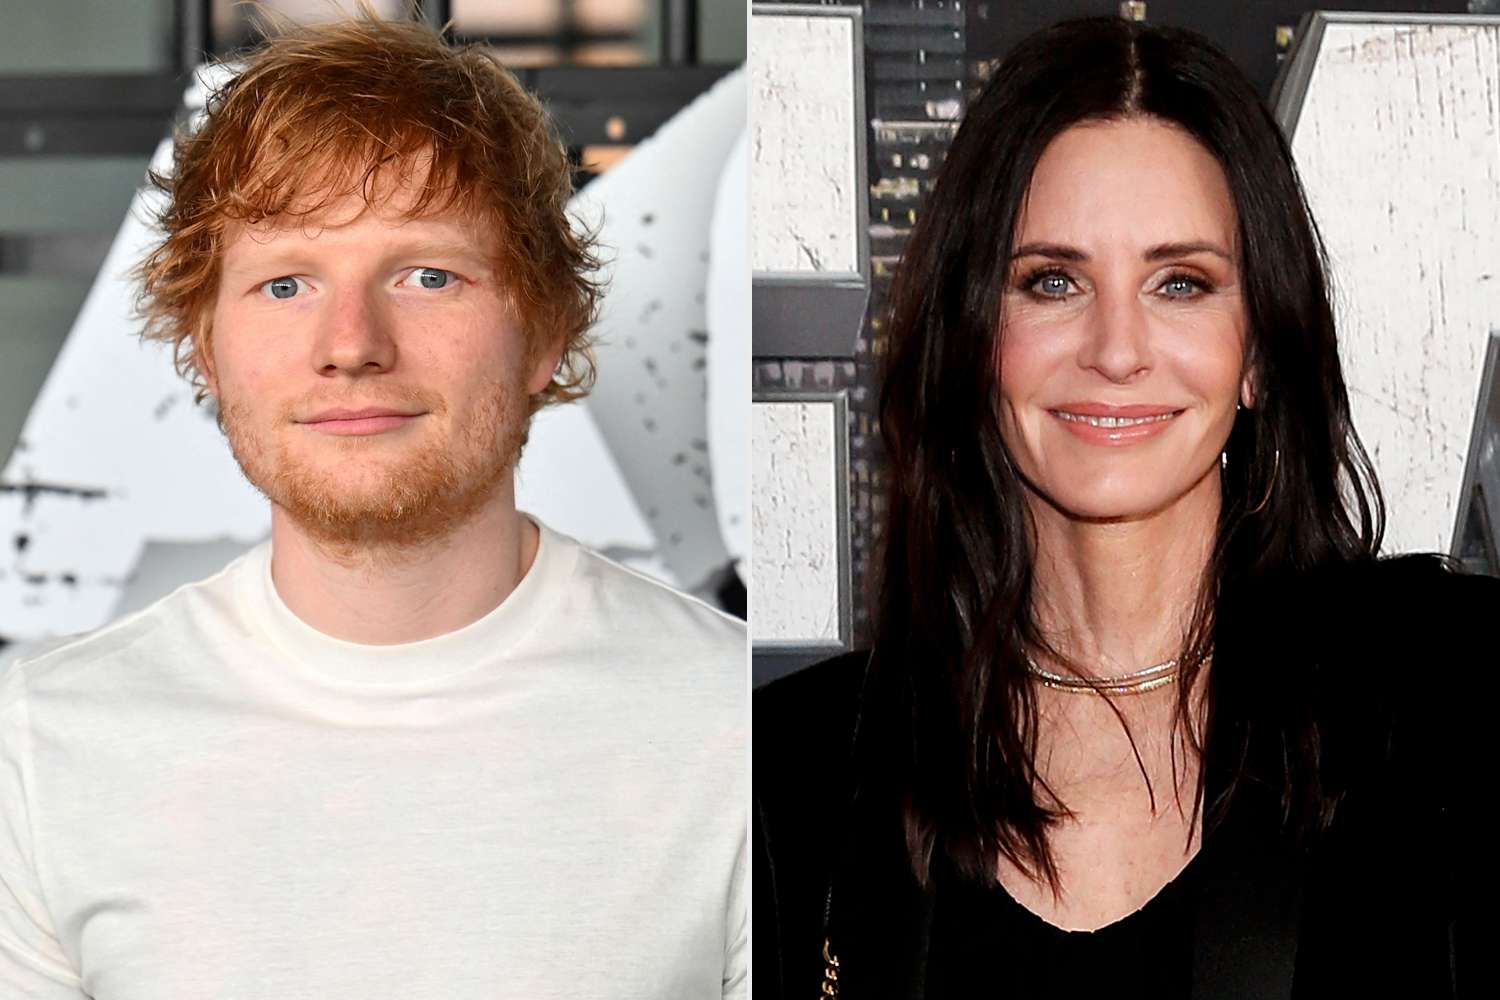 Watch Ed Sheeran perform 'Friends'-inspired song for Courtney Cox